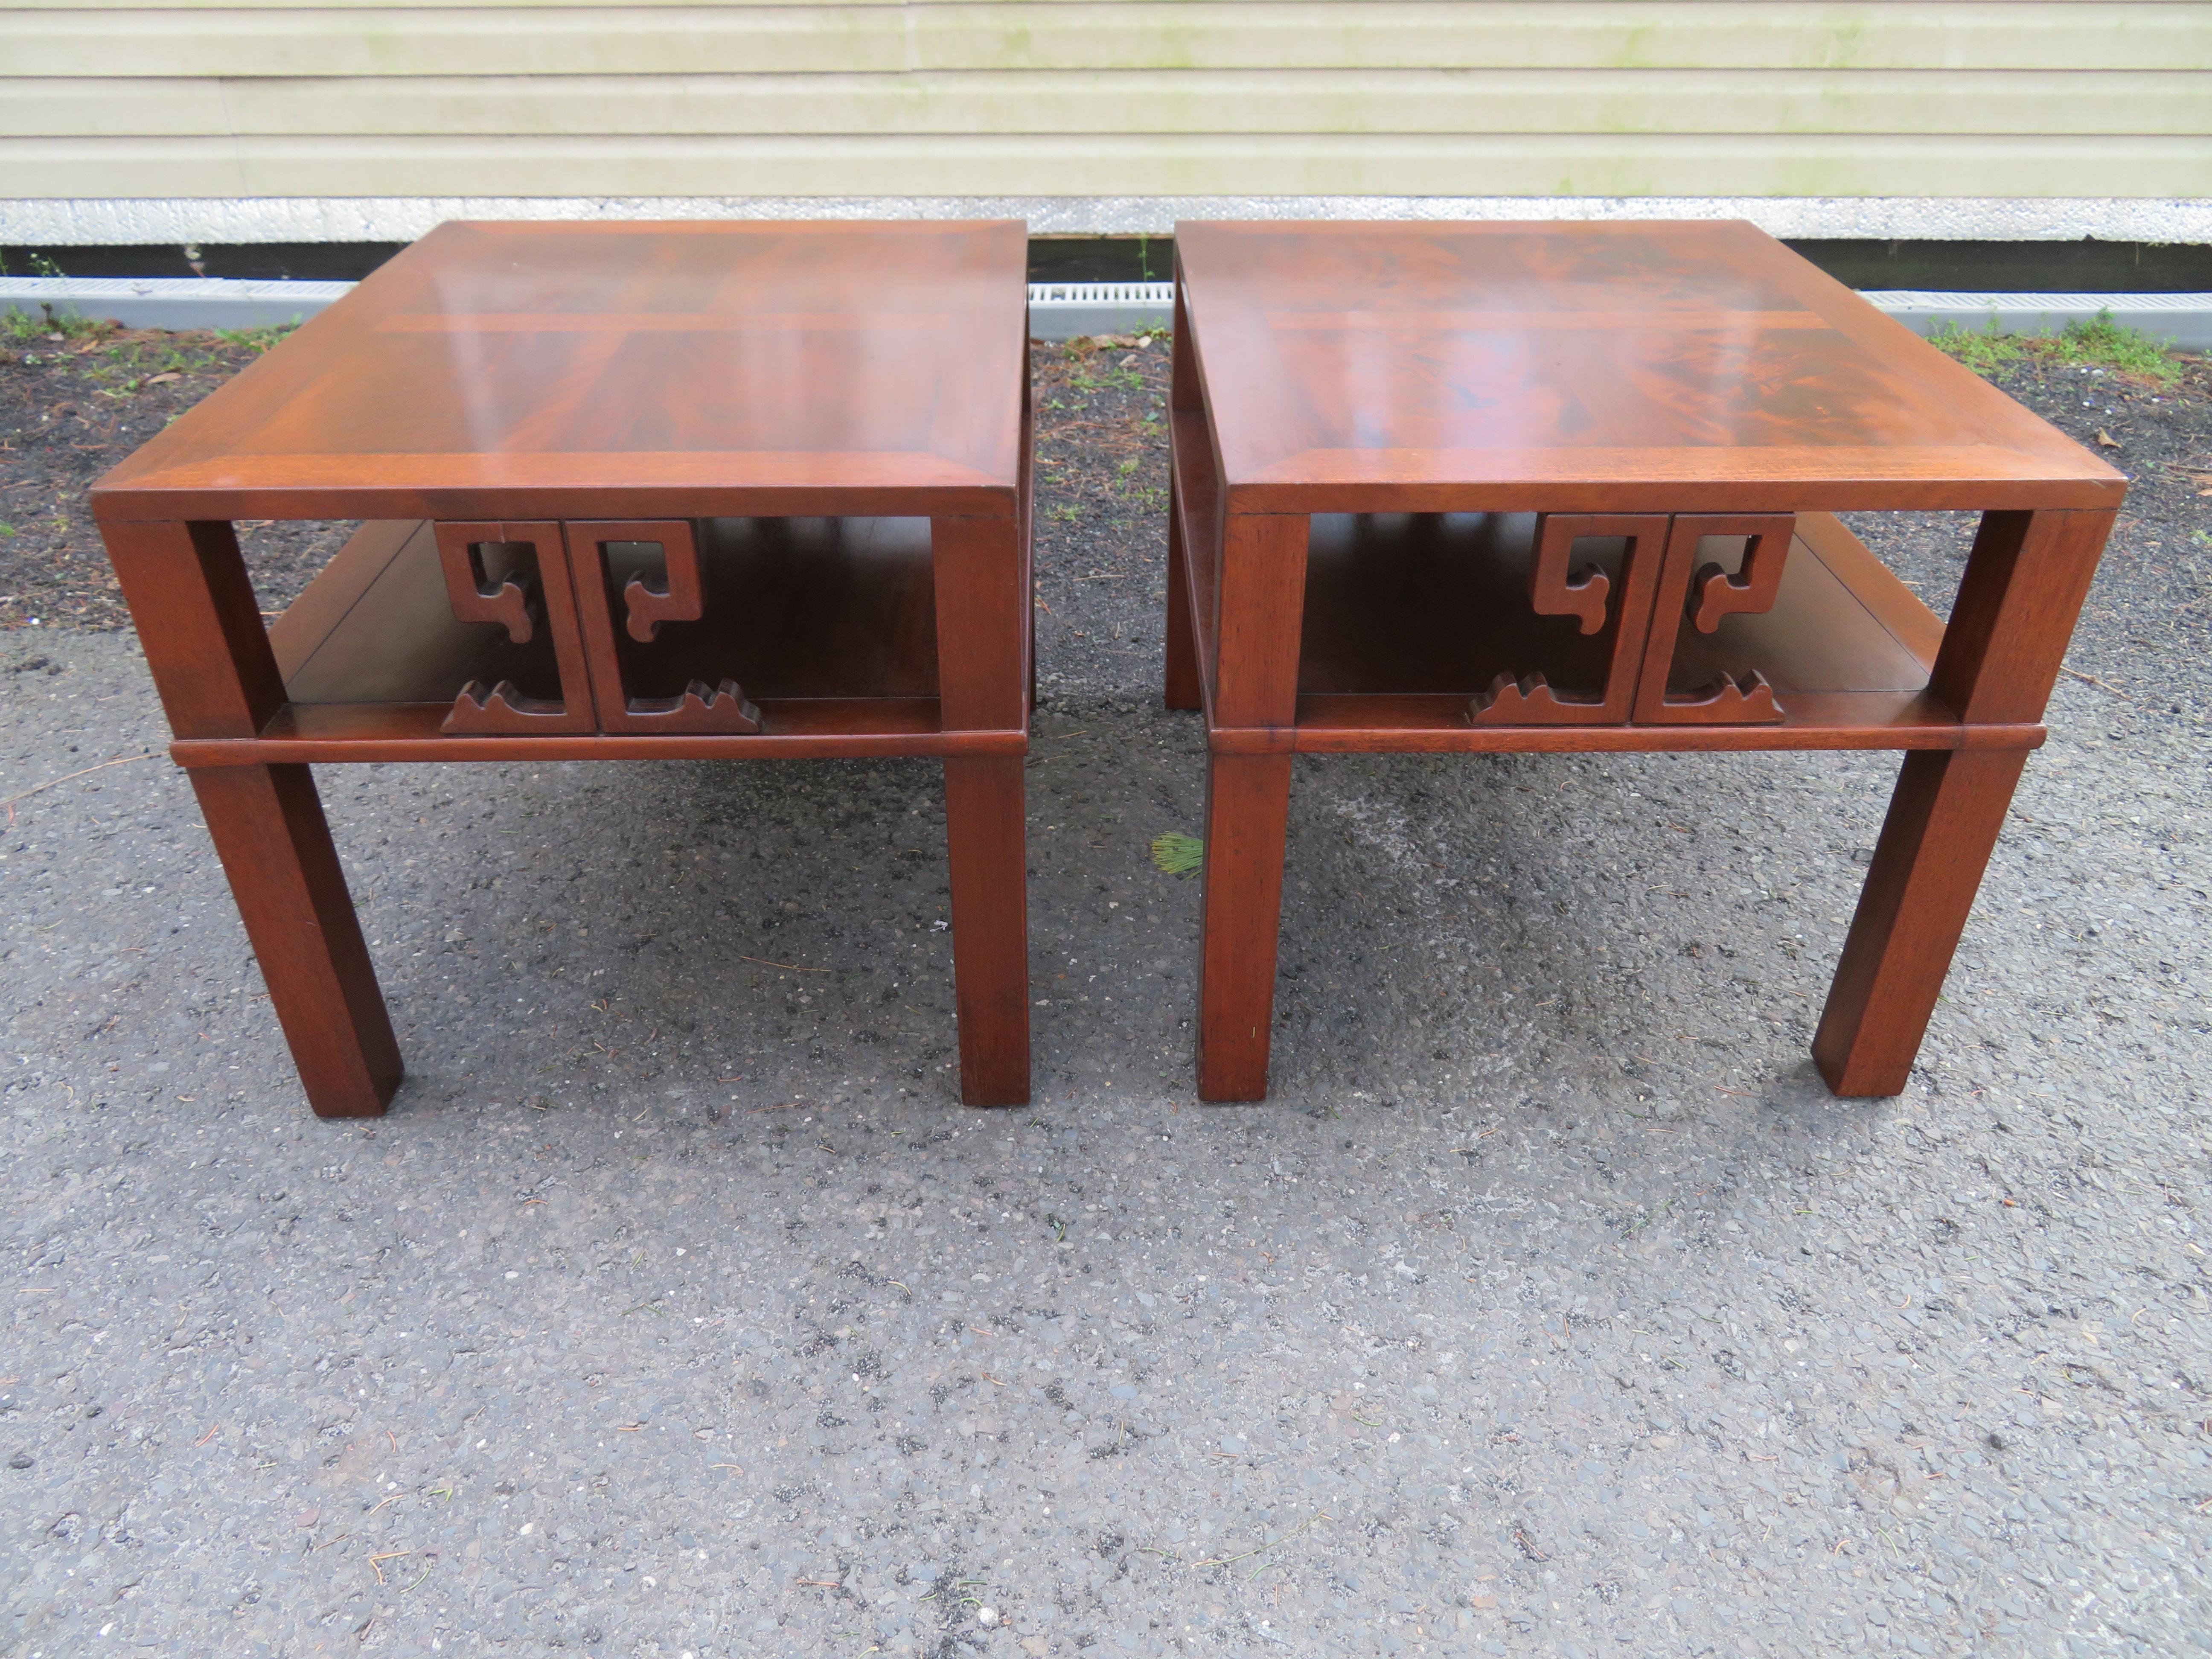 Handsome pair of Asian style parsons end table/ night stands by Heritage Henredon, circa 1960. Wonderful flame mahogany top with a lovely Asian influenced Greek Key motif. Beautifully conceived design with excellent attention to detail. These tables